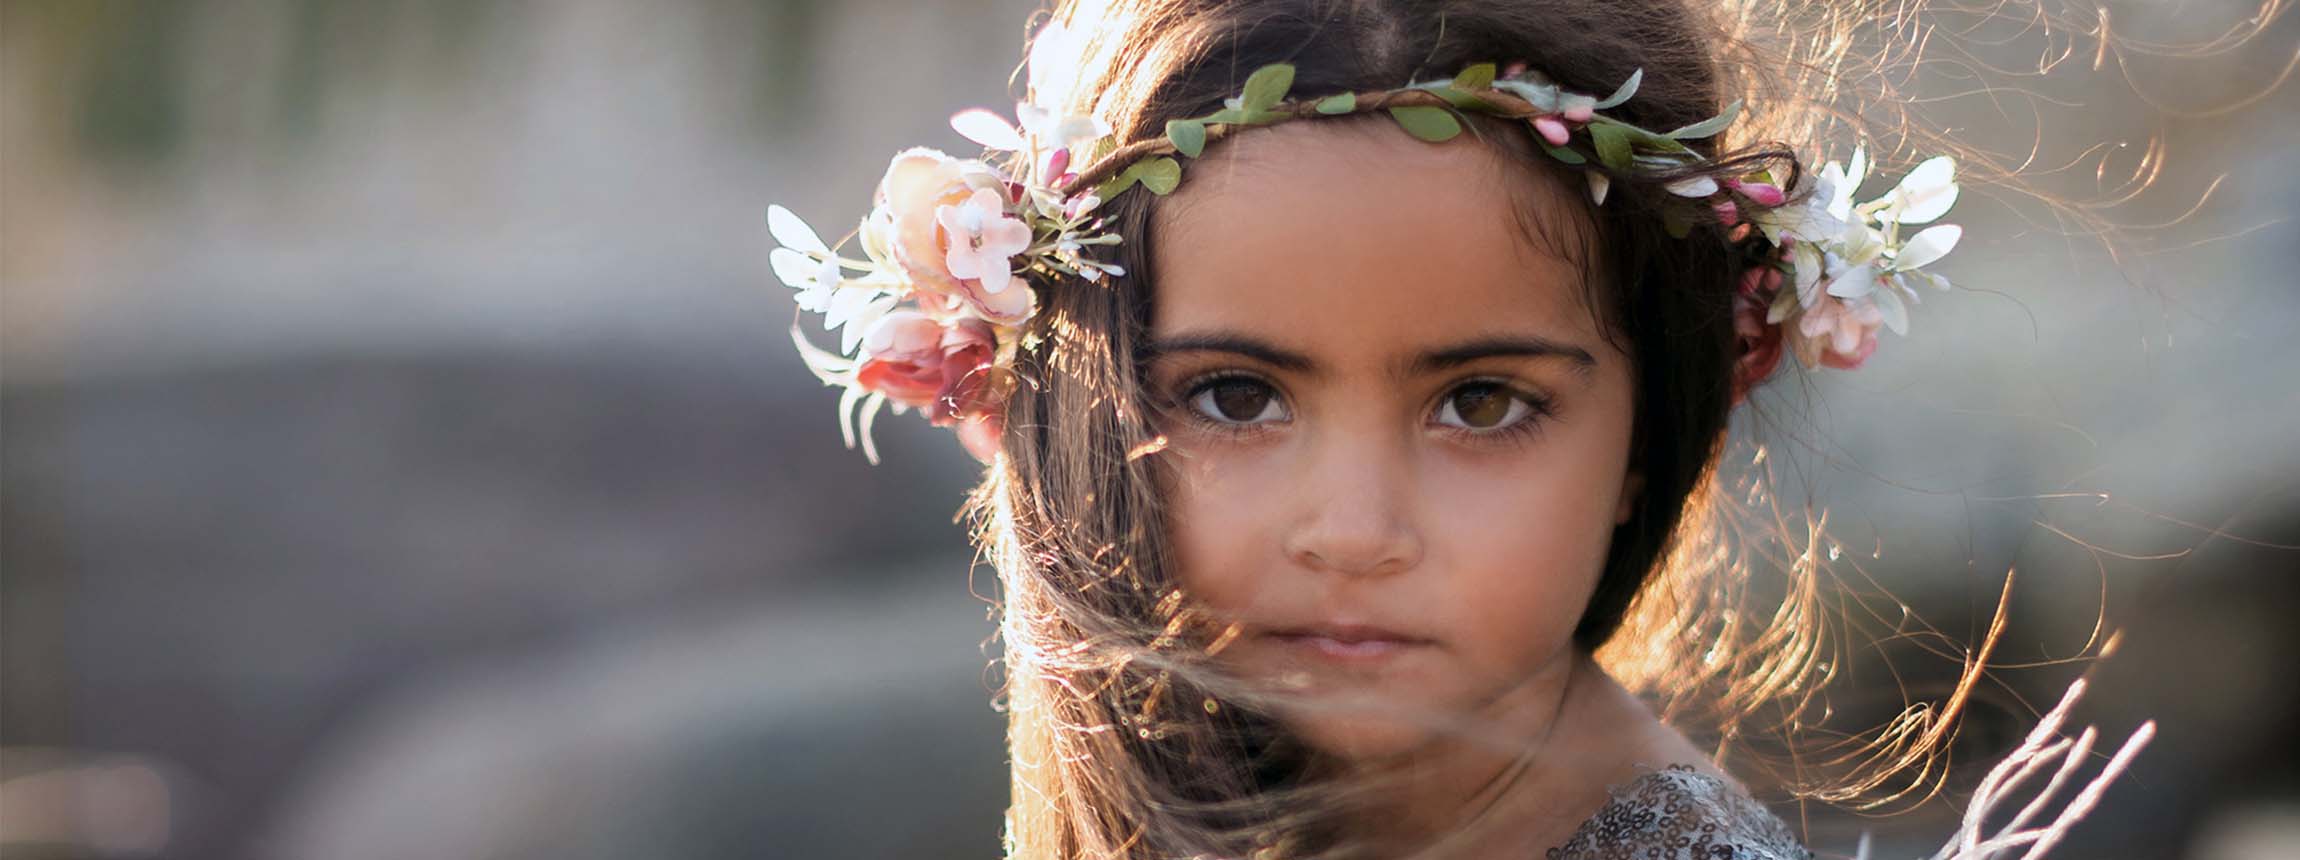 Young girl wearing headress of flowers